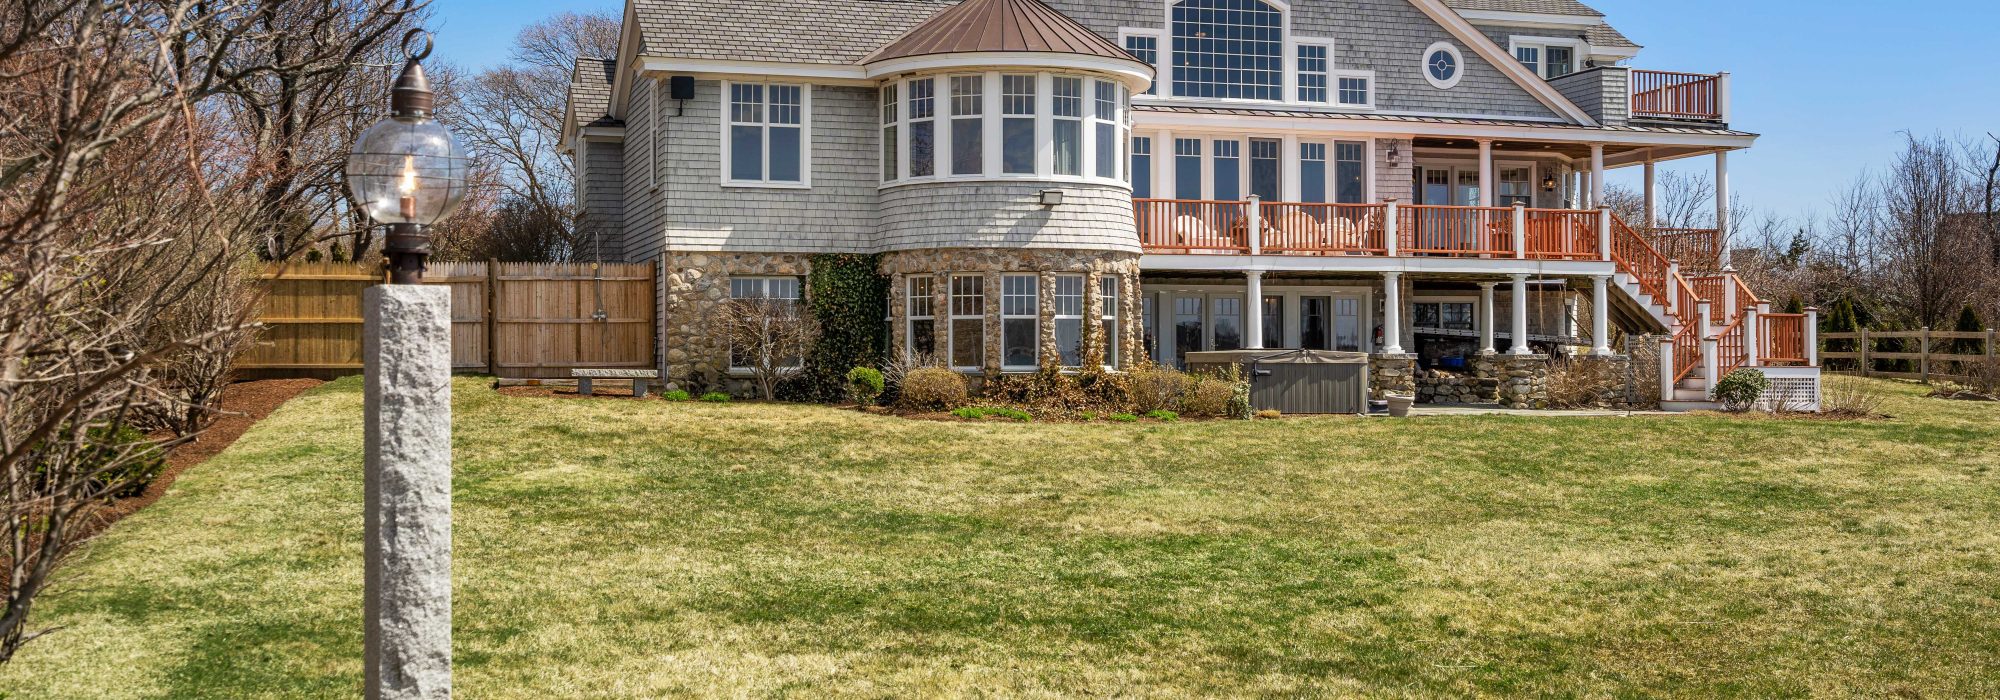 Real Estate Photography Gloucester, MA - Luxury Properties